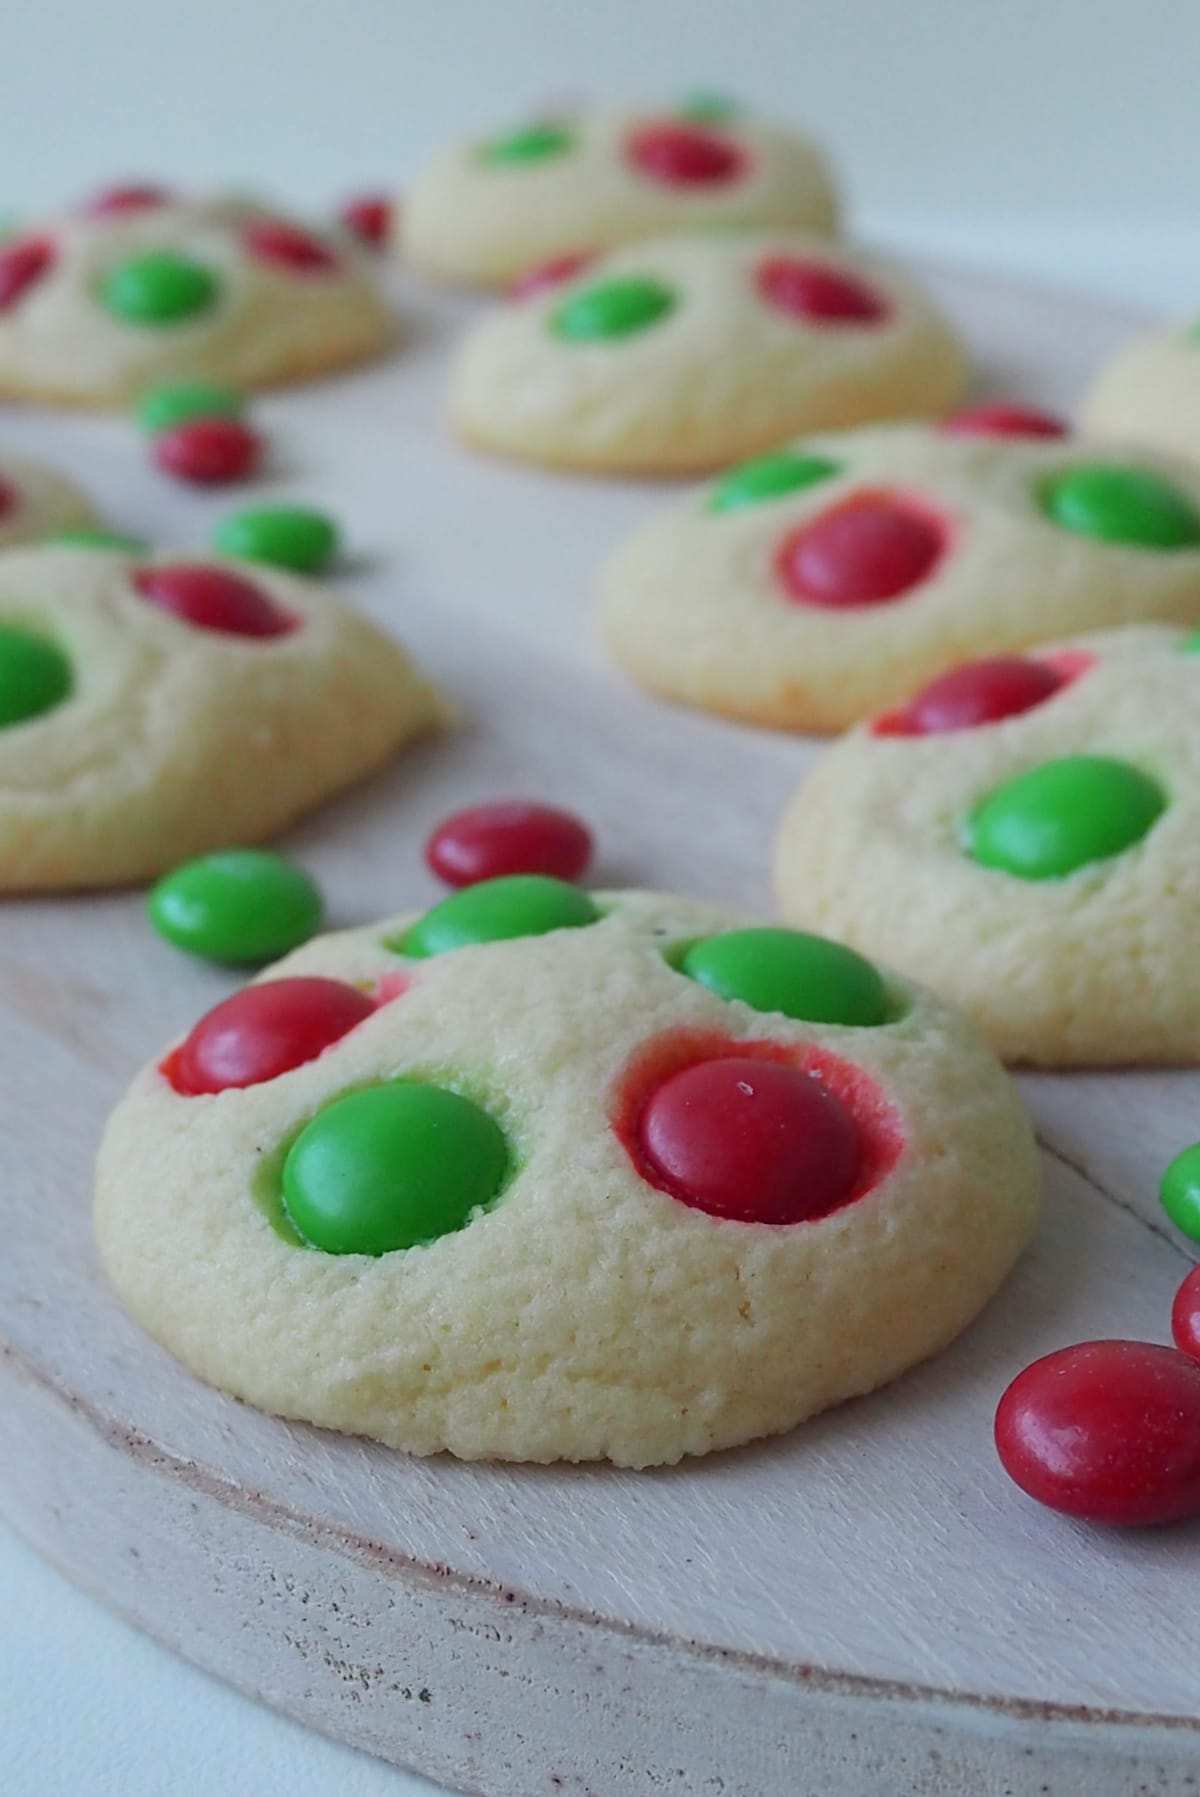 Side view of Christmas Biscuits decorated with M&M's on a wooden serving plate.